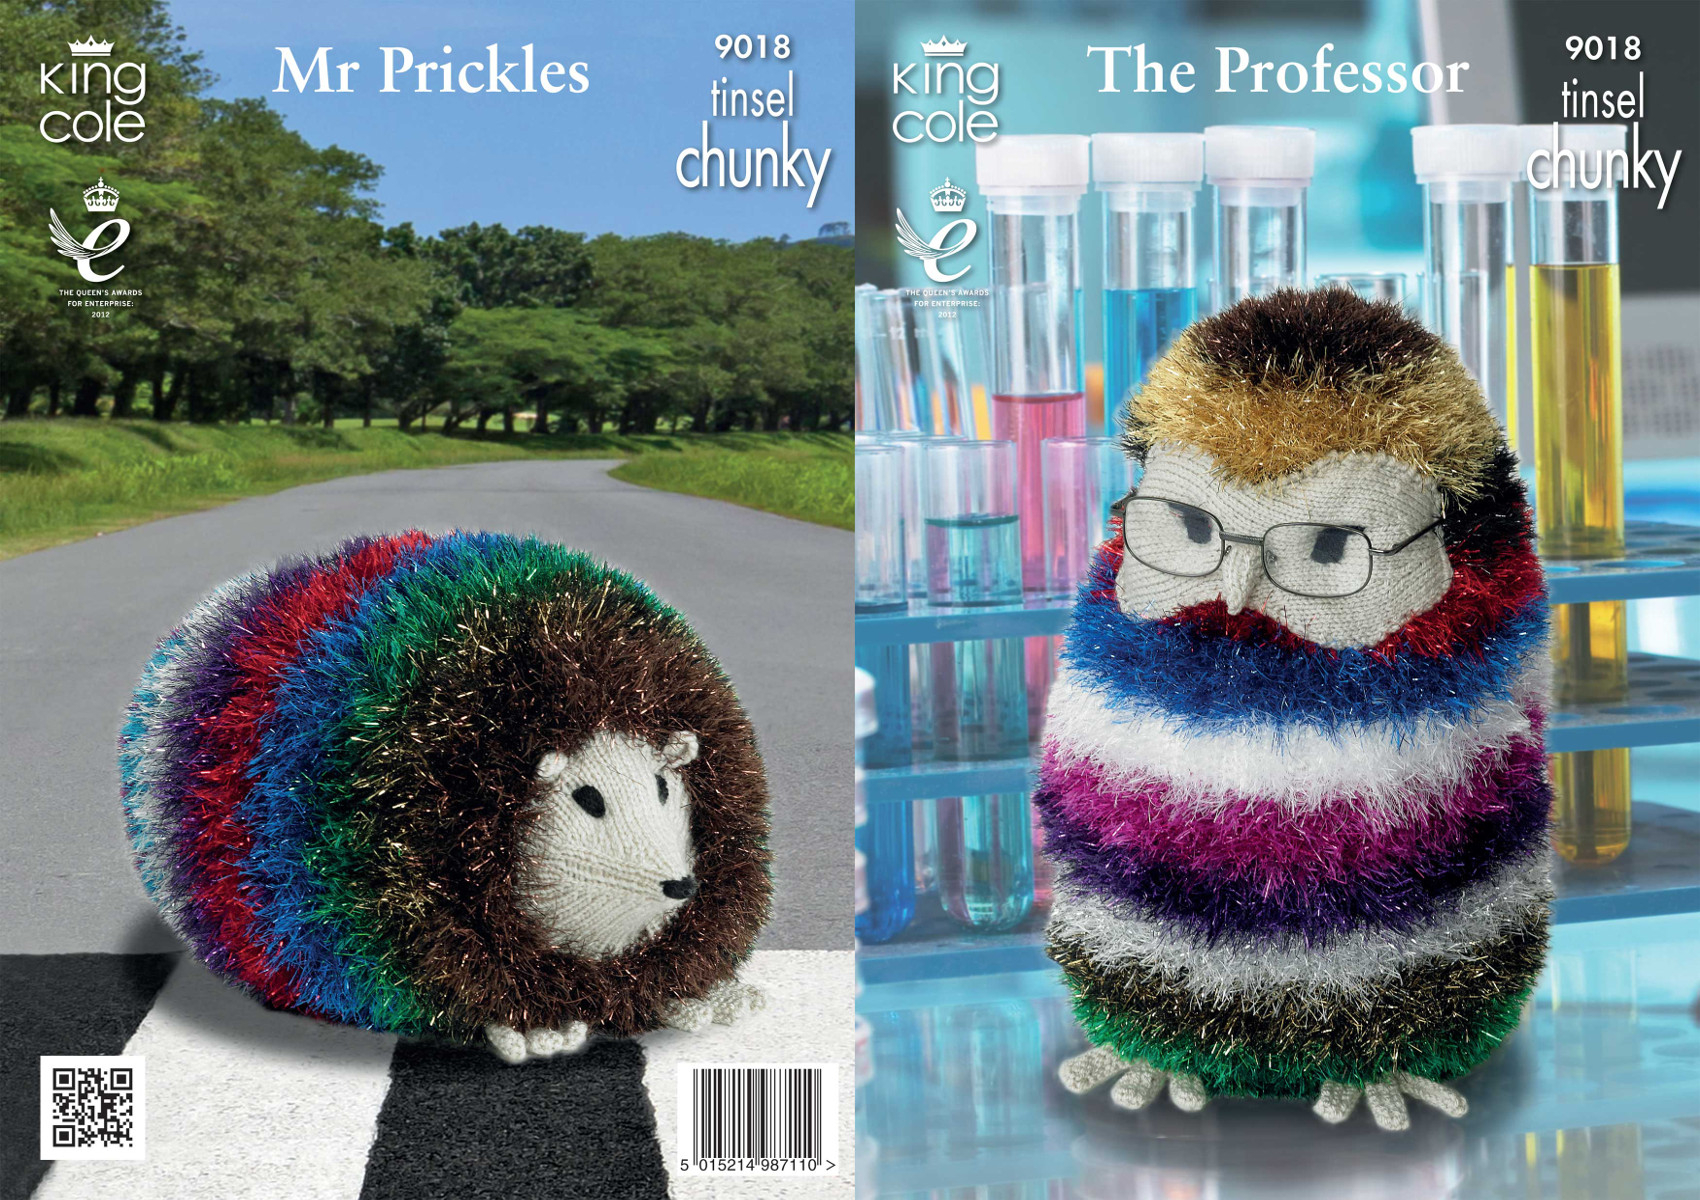 Animal Knitting Patterns Details About Tinsel Chunky Knitting Pattern King Cole The Professor Mr Prickles Animal 9018